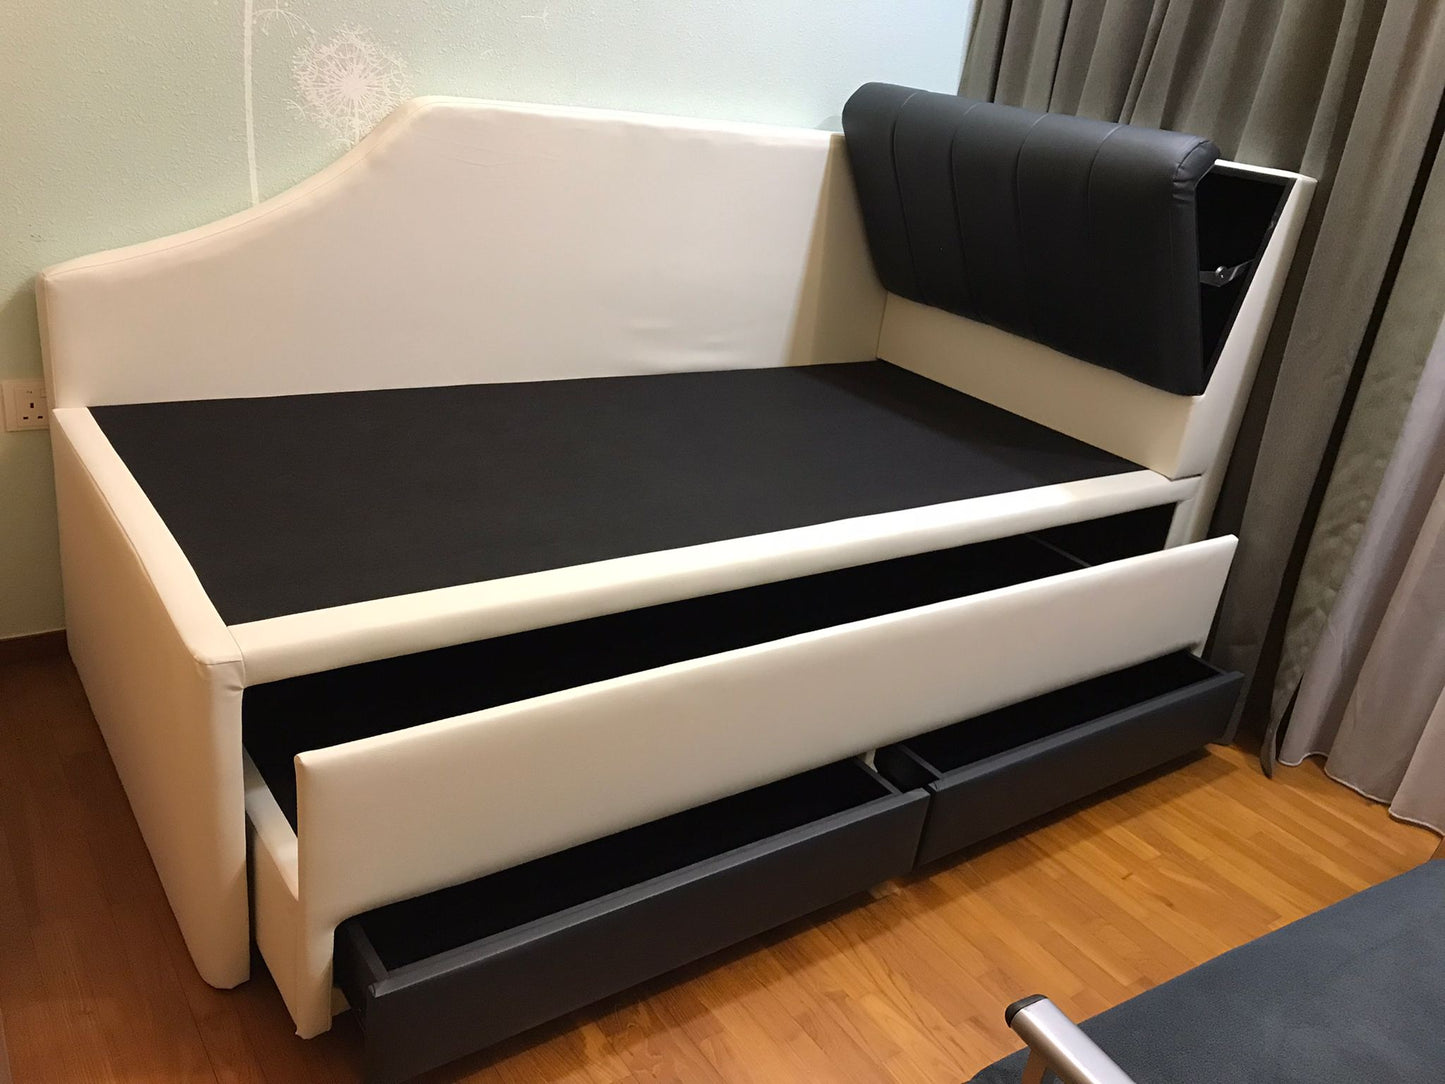 Pullout Bedframe 5in1 with Mattress | MLS87-BESTSELLER